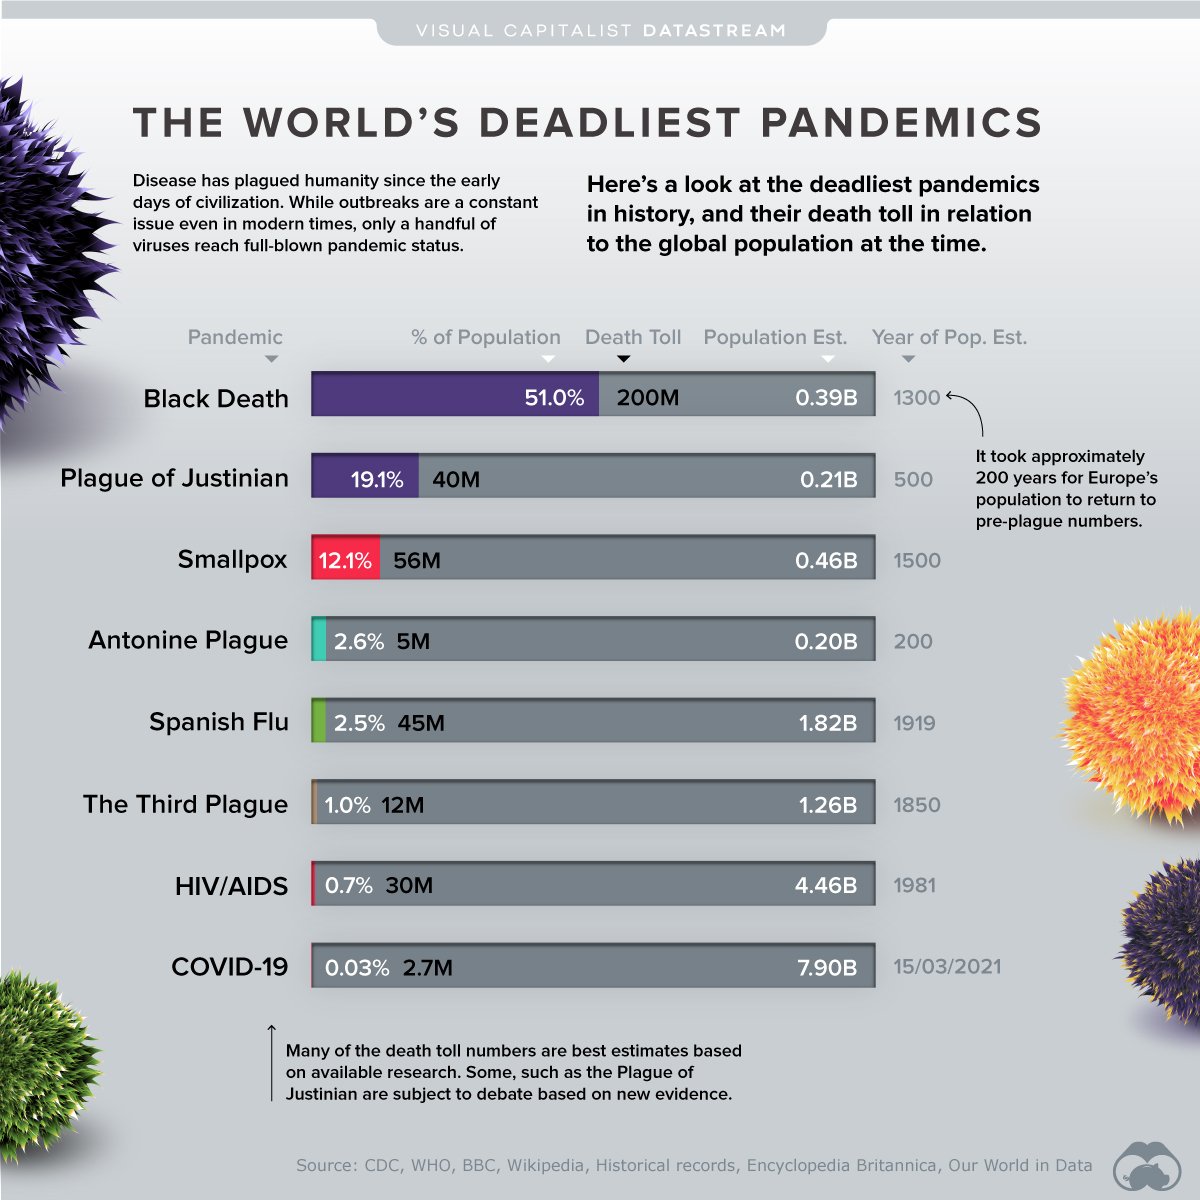  New Visual Compares the World’s Deadliest Pandemics by Population Impact – And COVID’s Placement May Surprise You